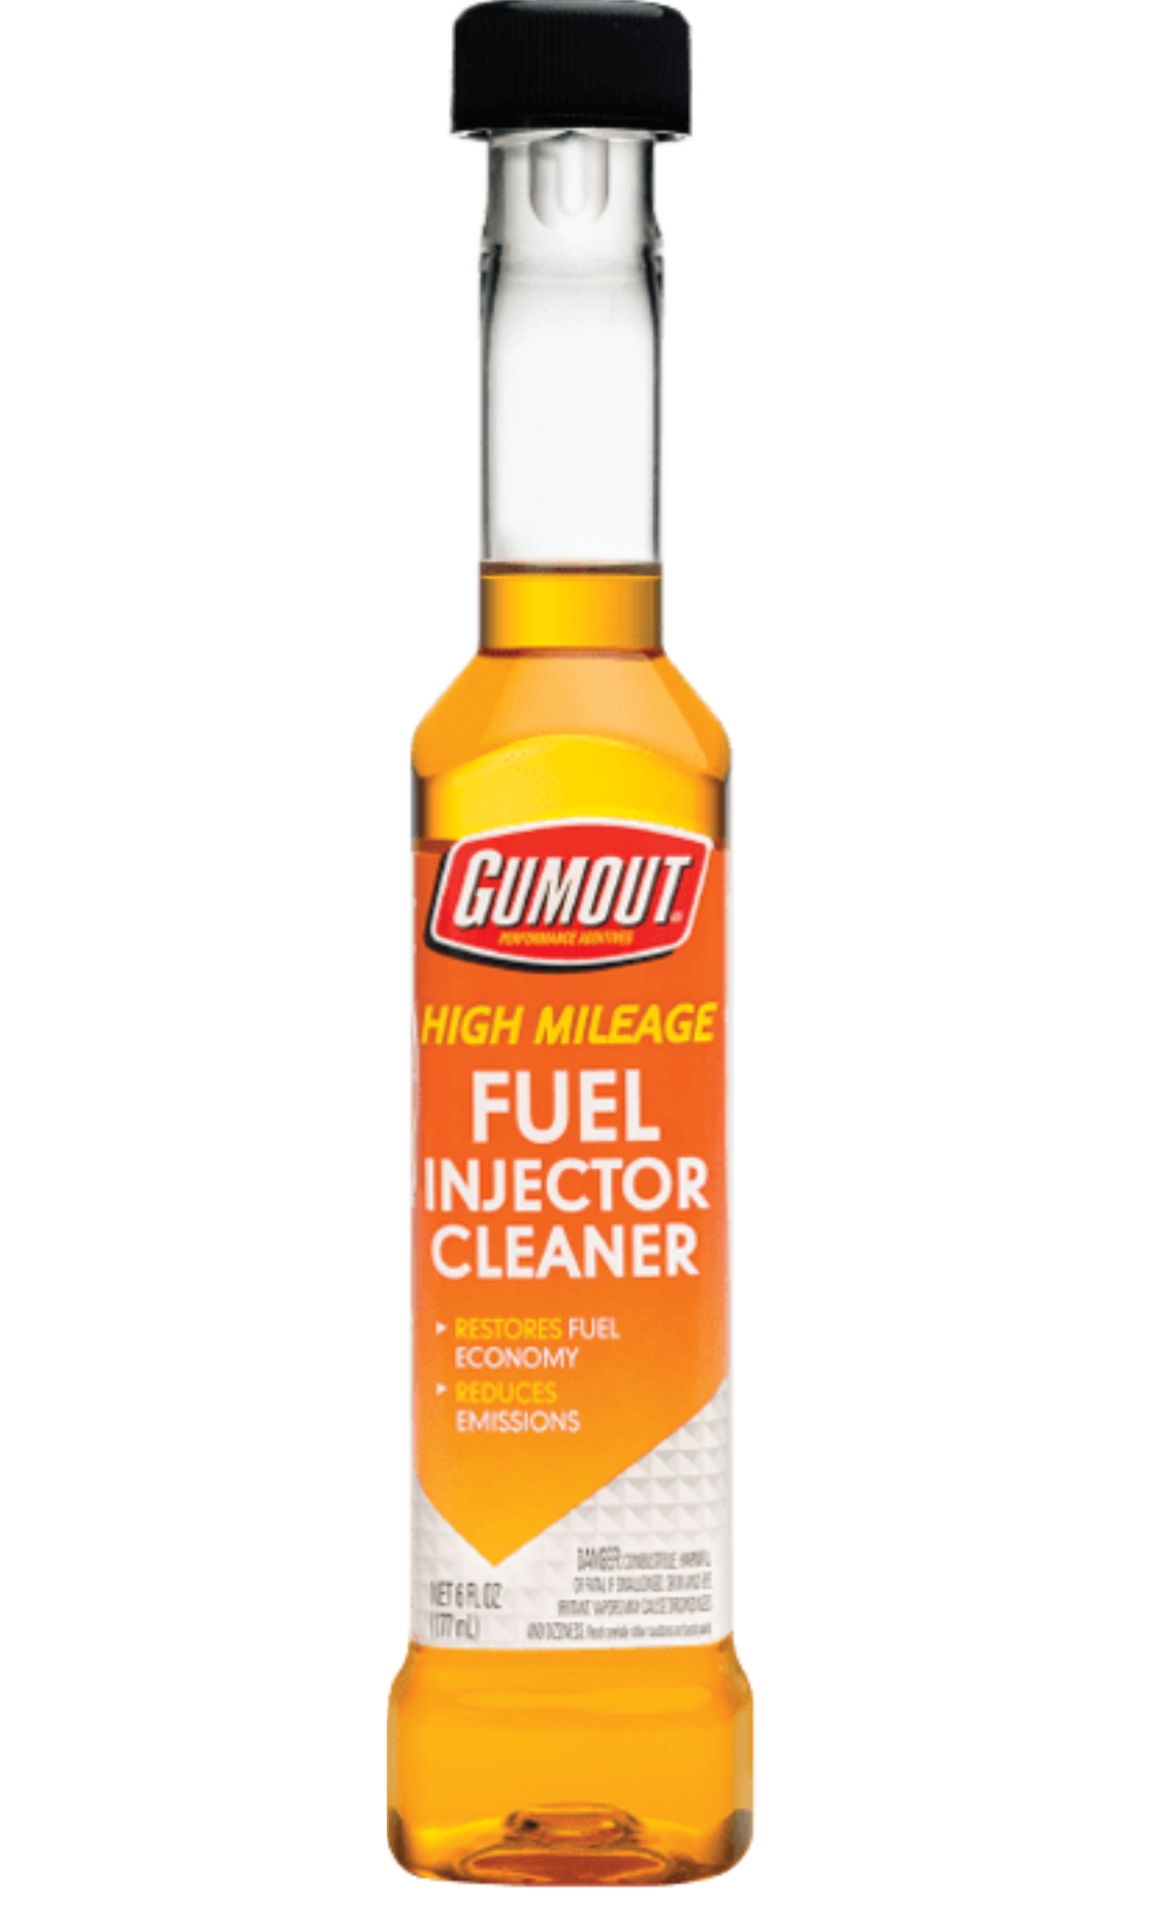 Gumout Fuel Injector Cleaner, High Mileage - 6 fl oz